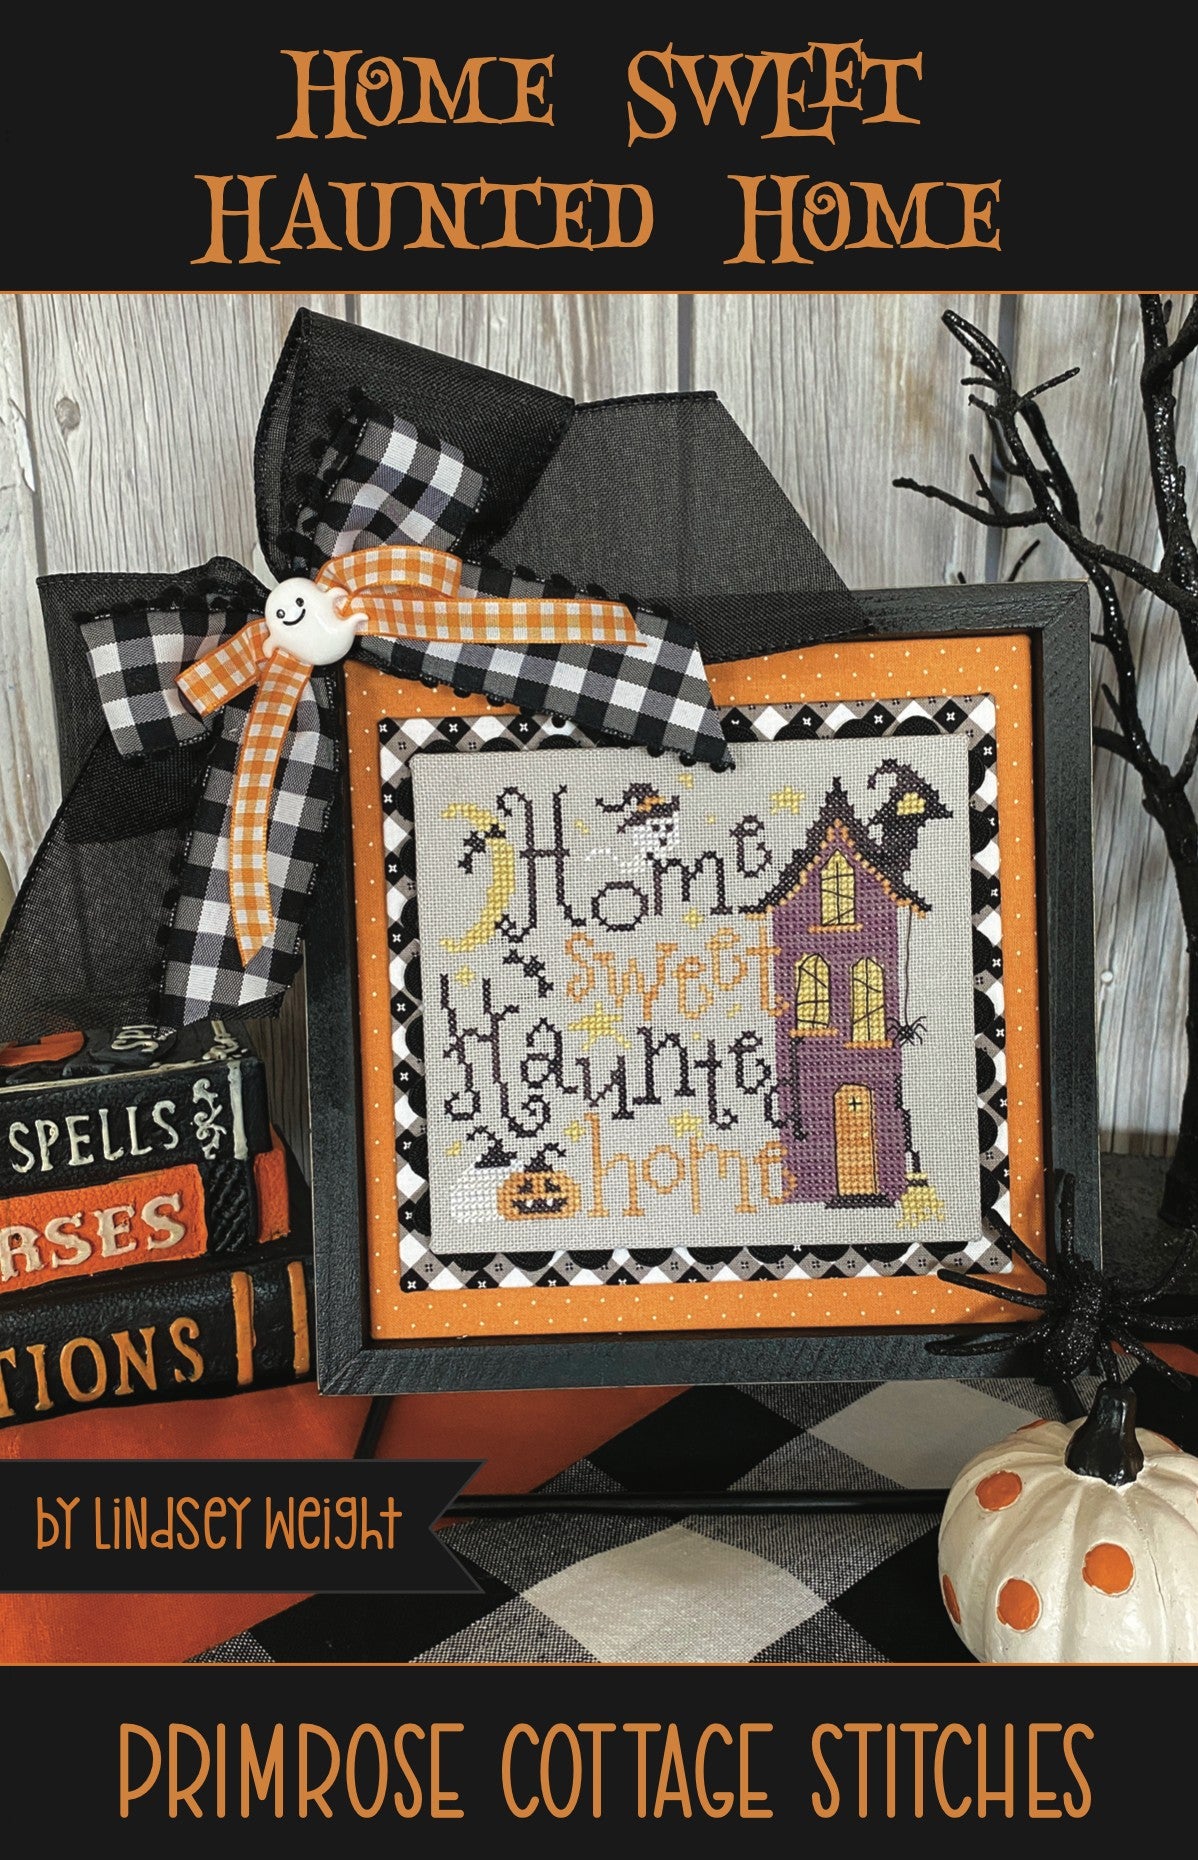 Home Sweet Haunted Home by Primrose Cottage Primrose Cottage